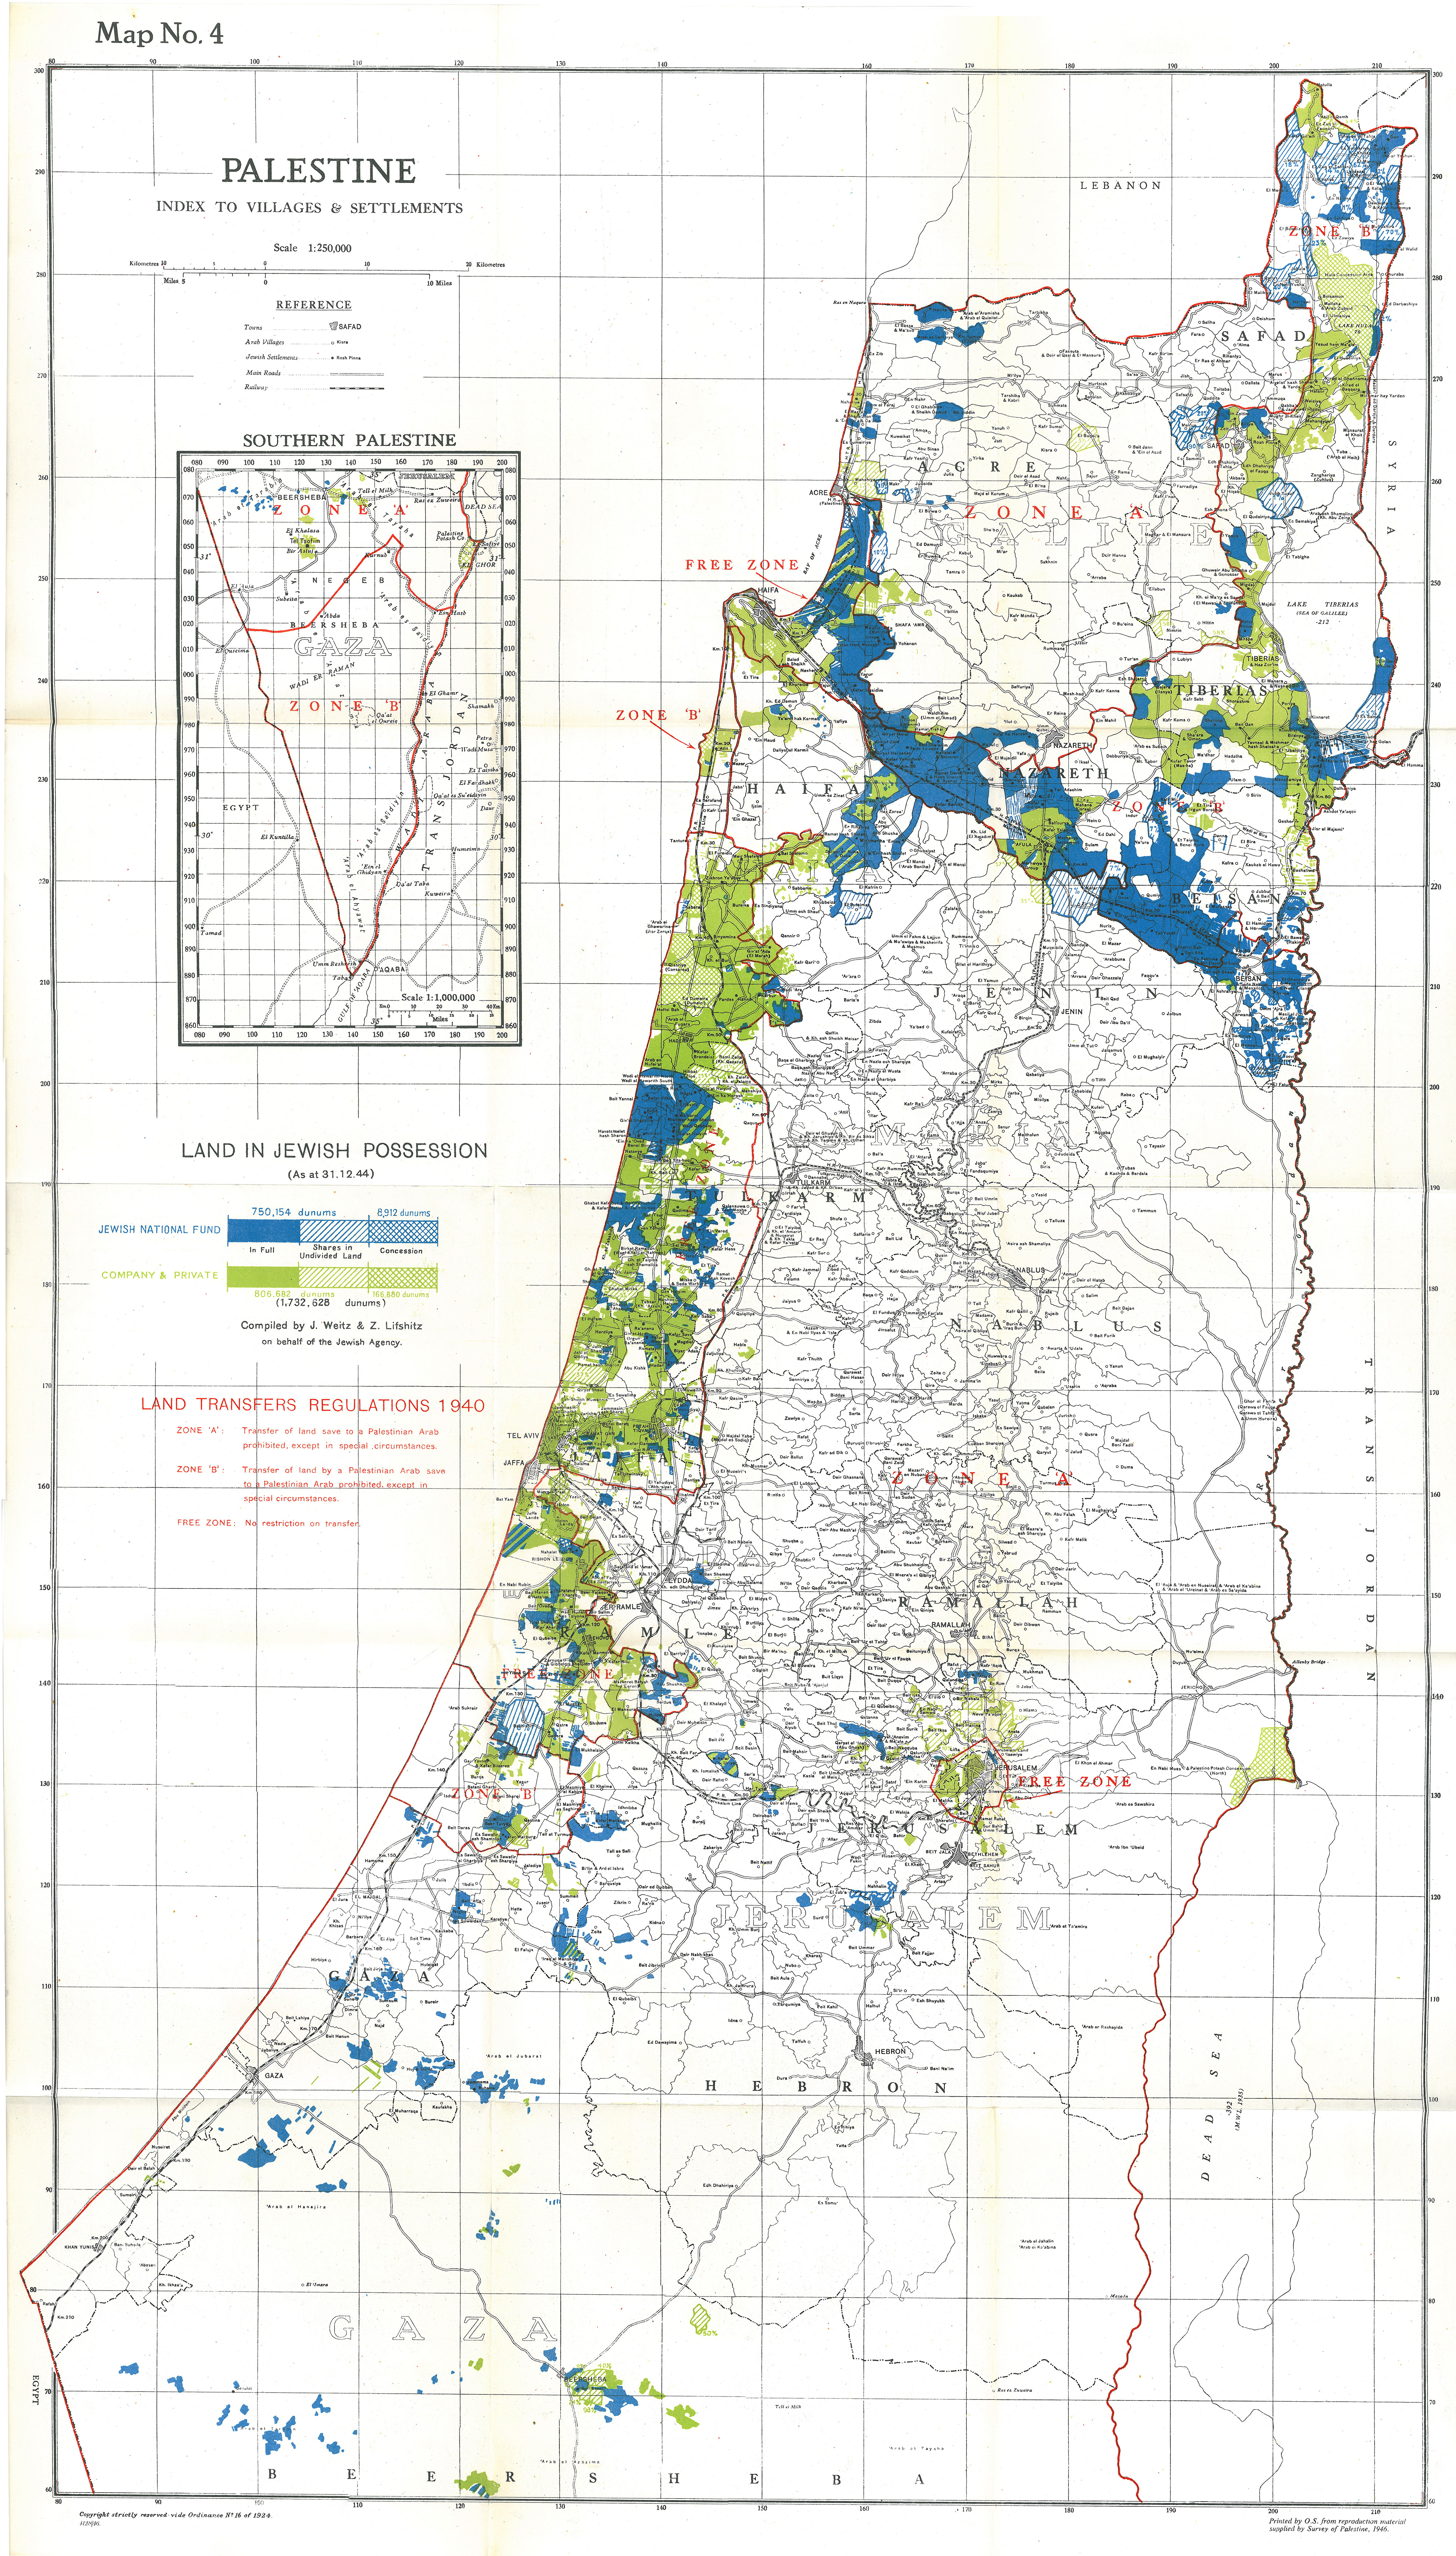 Palestine_Index_to_Villages_and_Settlements%2C_showing_Land_in_Jewish_Possession_as_at_31.12.44.jpg